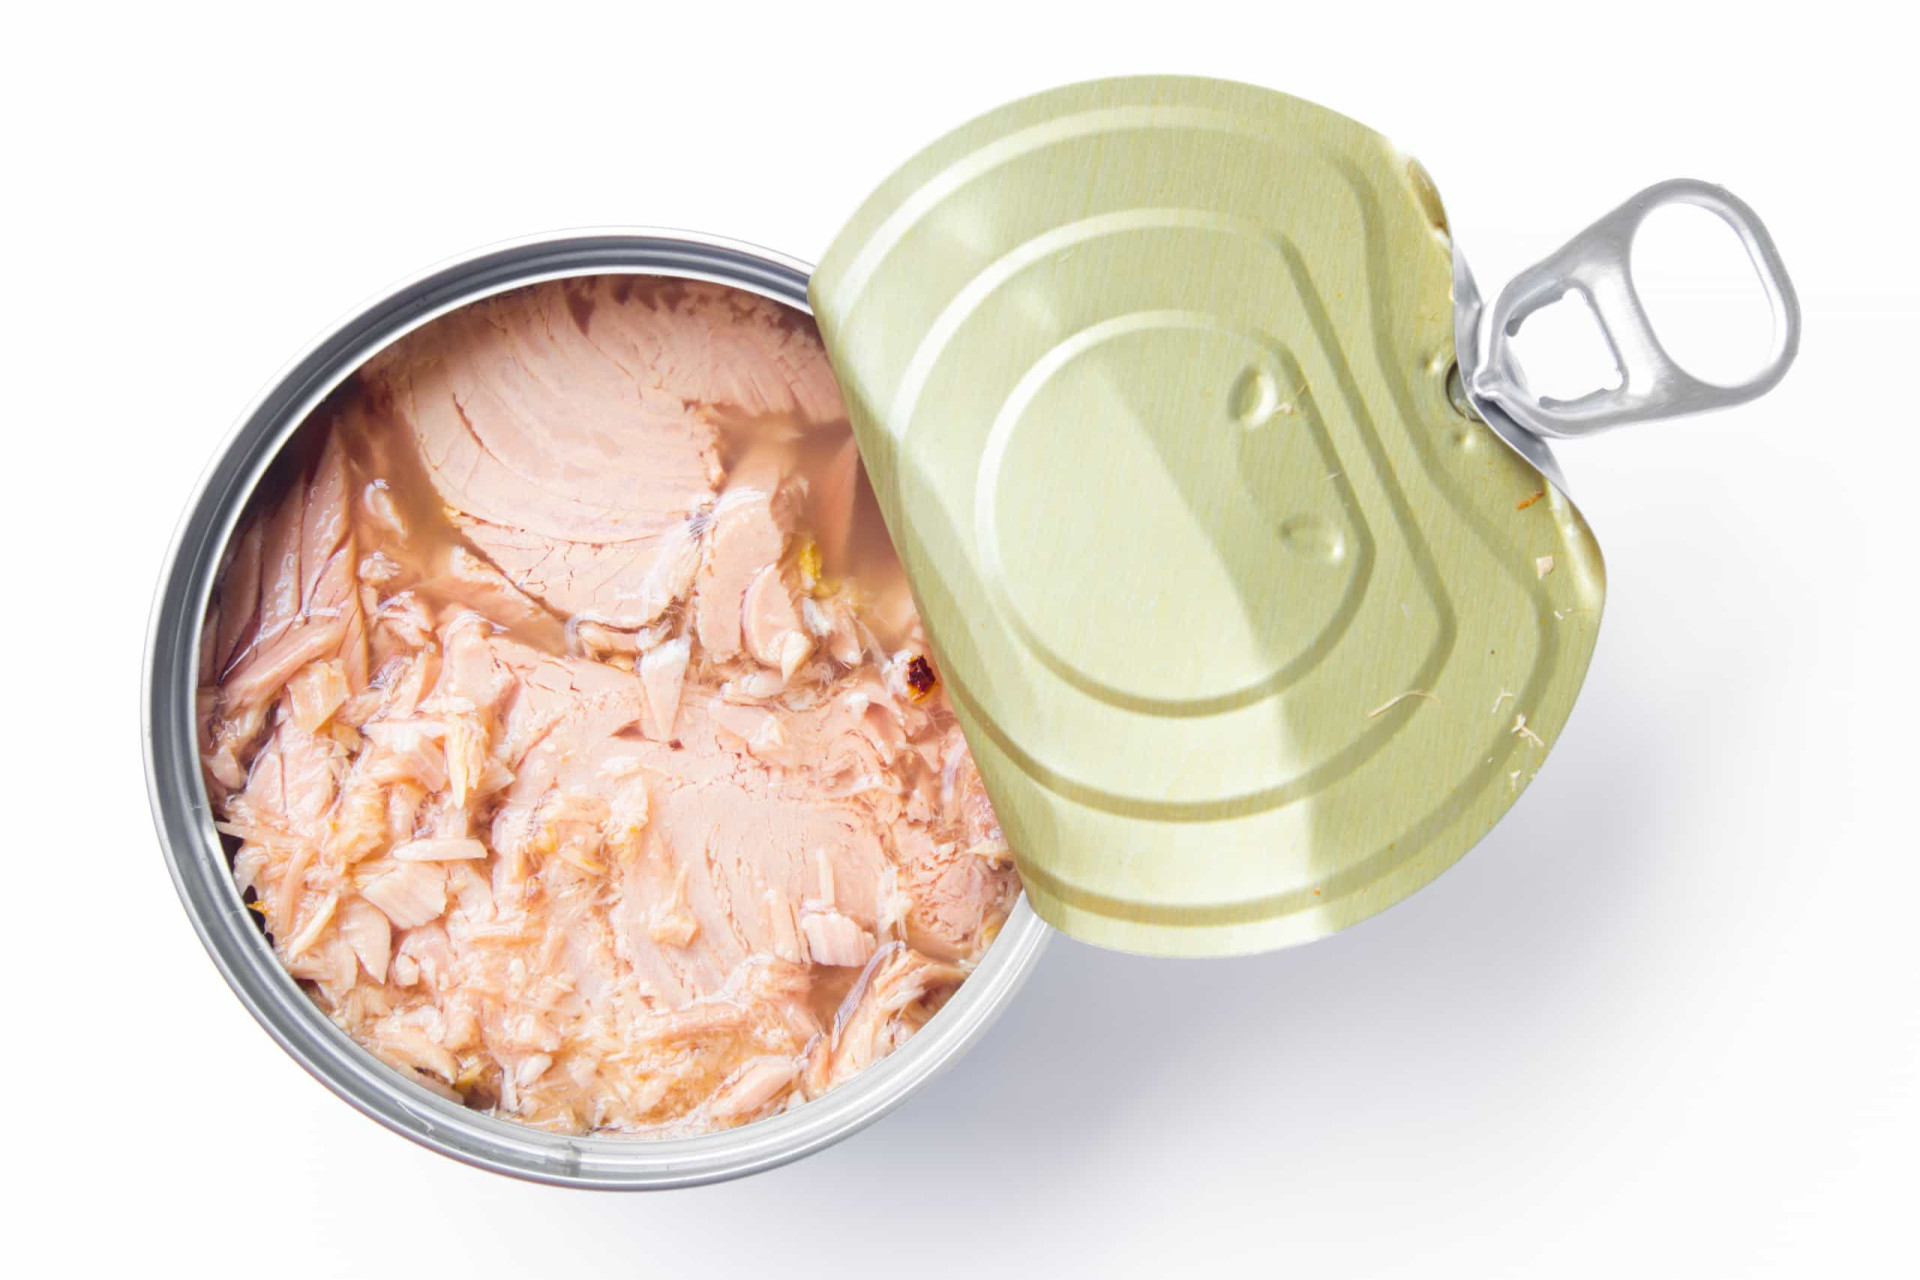 <p>Canned tuna comes in different varieties: brine, spring water, sunflower, or olive oil. Tuna in water contains more omega-3s and fewer calories compared to tuna in oil. However, choosing tuna in brine will result in a higher sodium (salt) content. Nutritionally, water-packed tuna offers pure protein and a milder tuna taste.</p><p><a href="https://www.msn.com/en-us/community/channel/vid-7xx8mnucu55yw63we9va2gwr7uihbxwc68fxqp25x6tg4ftibpra?cvid=94631541bc0f4f89bfd59158d696ad7e">Follow us and access great exclusive content every day</a></p>